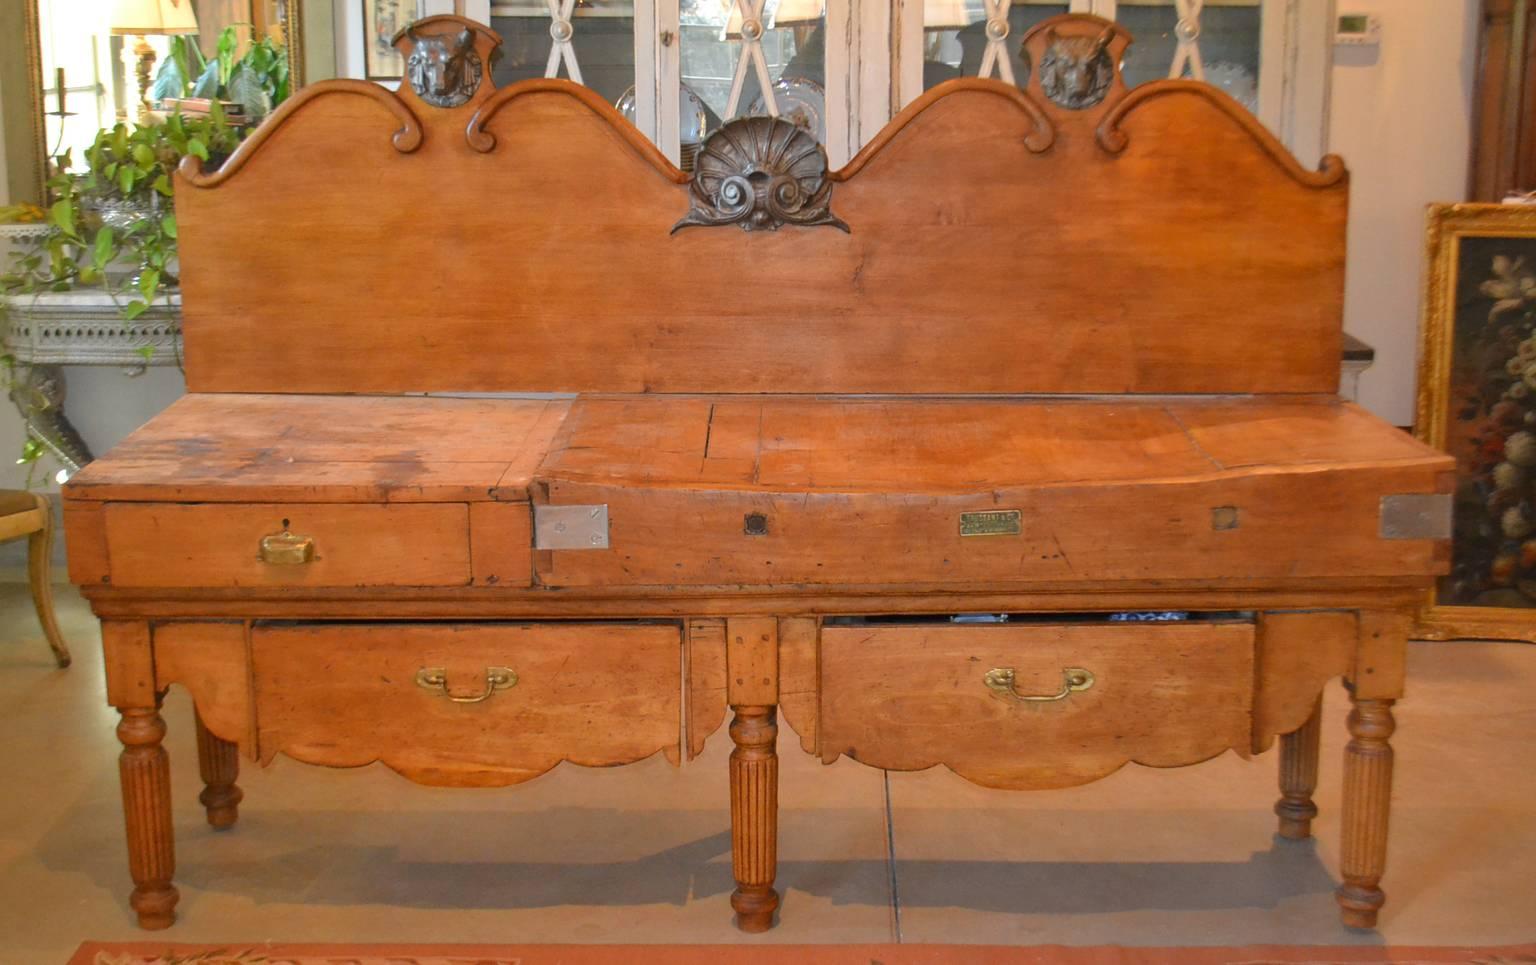 Long double Butcher Block Table in 7 Pieces. Circa 1890. Large piece has three drawers and one knife slot. Back piece has iron shell motif in center and two animal heads on each side.
A fabulous, authentic 19th century French billot de boucher or